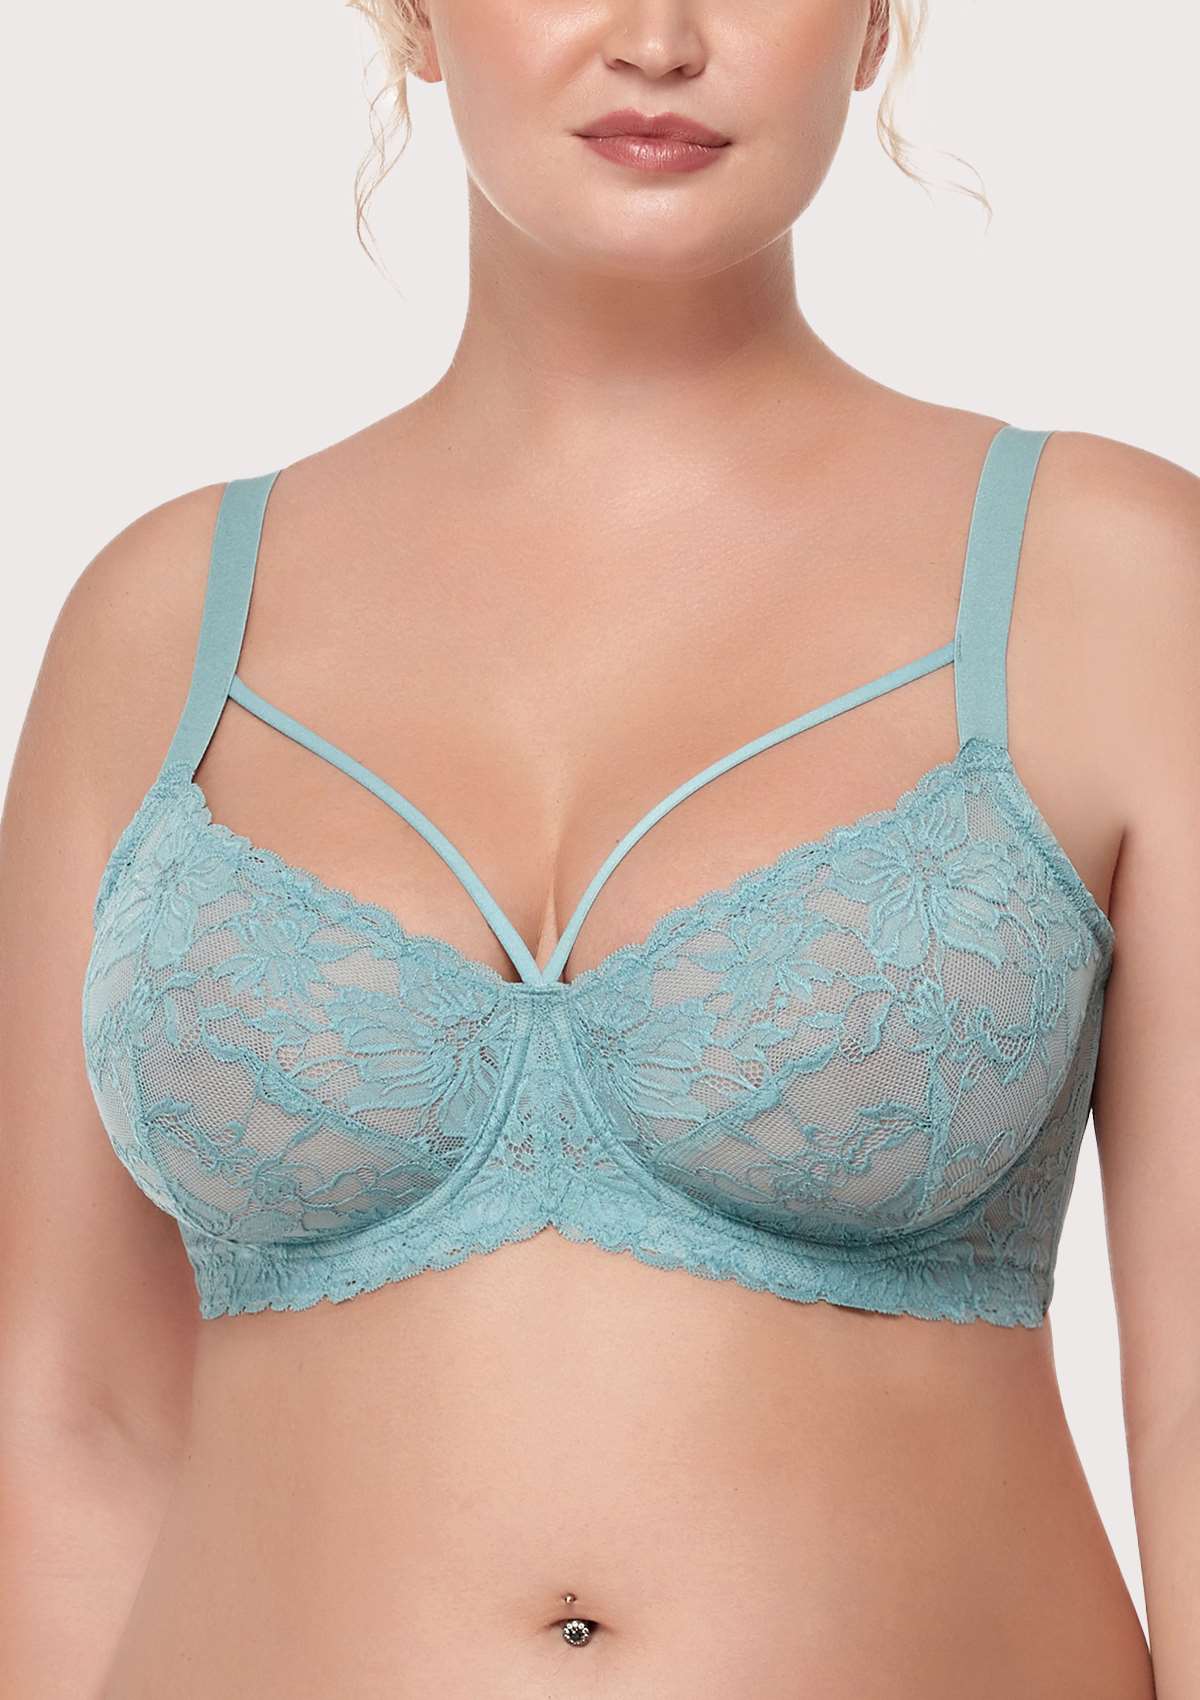 HSIA Pretty In Petals Unlined Lace Bra: Comfortable And Supportive Bra - Crystal Blue / 32 / C